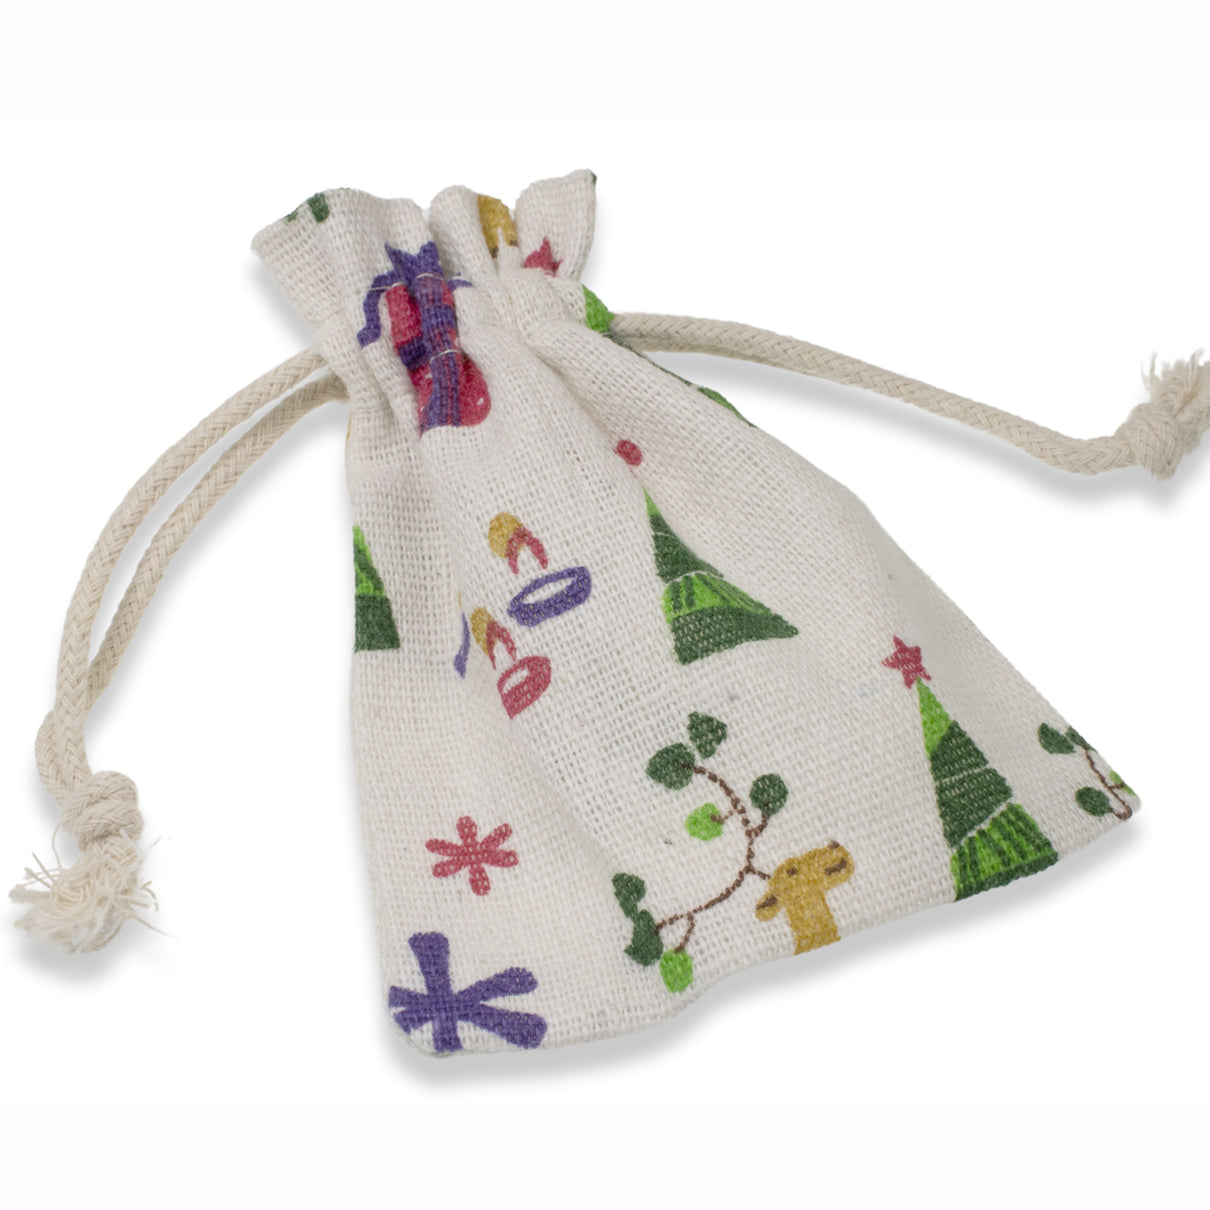 10 Small Christmas Themed Fabric Drawstring Bags, 3x4 Cloth Pouches